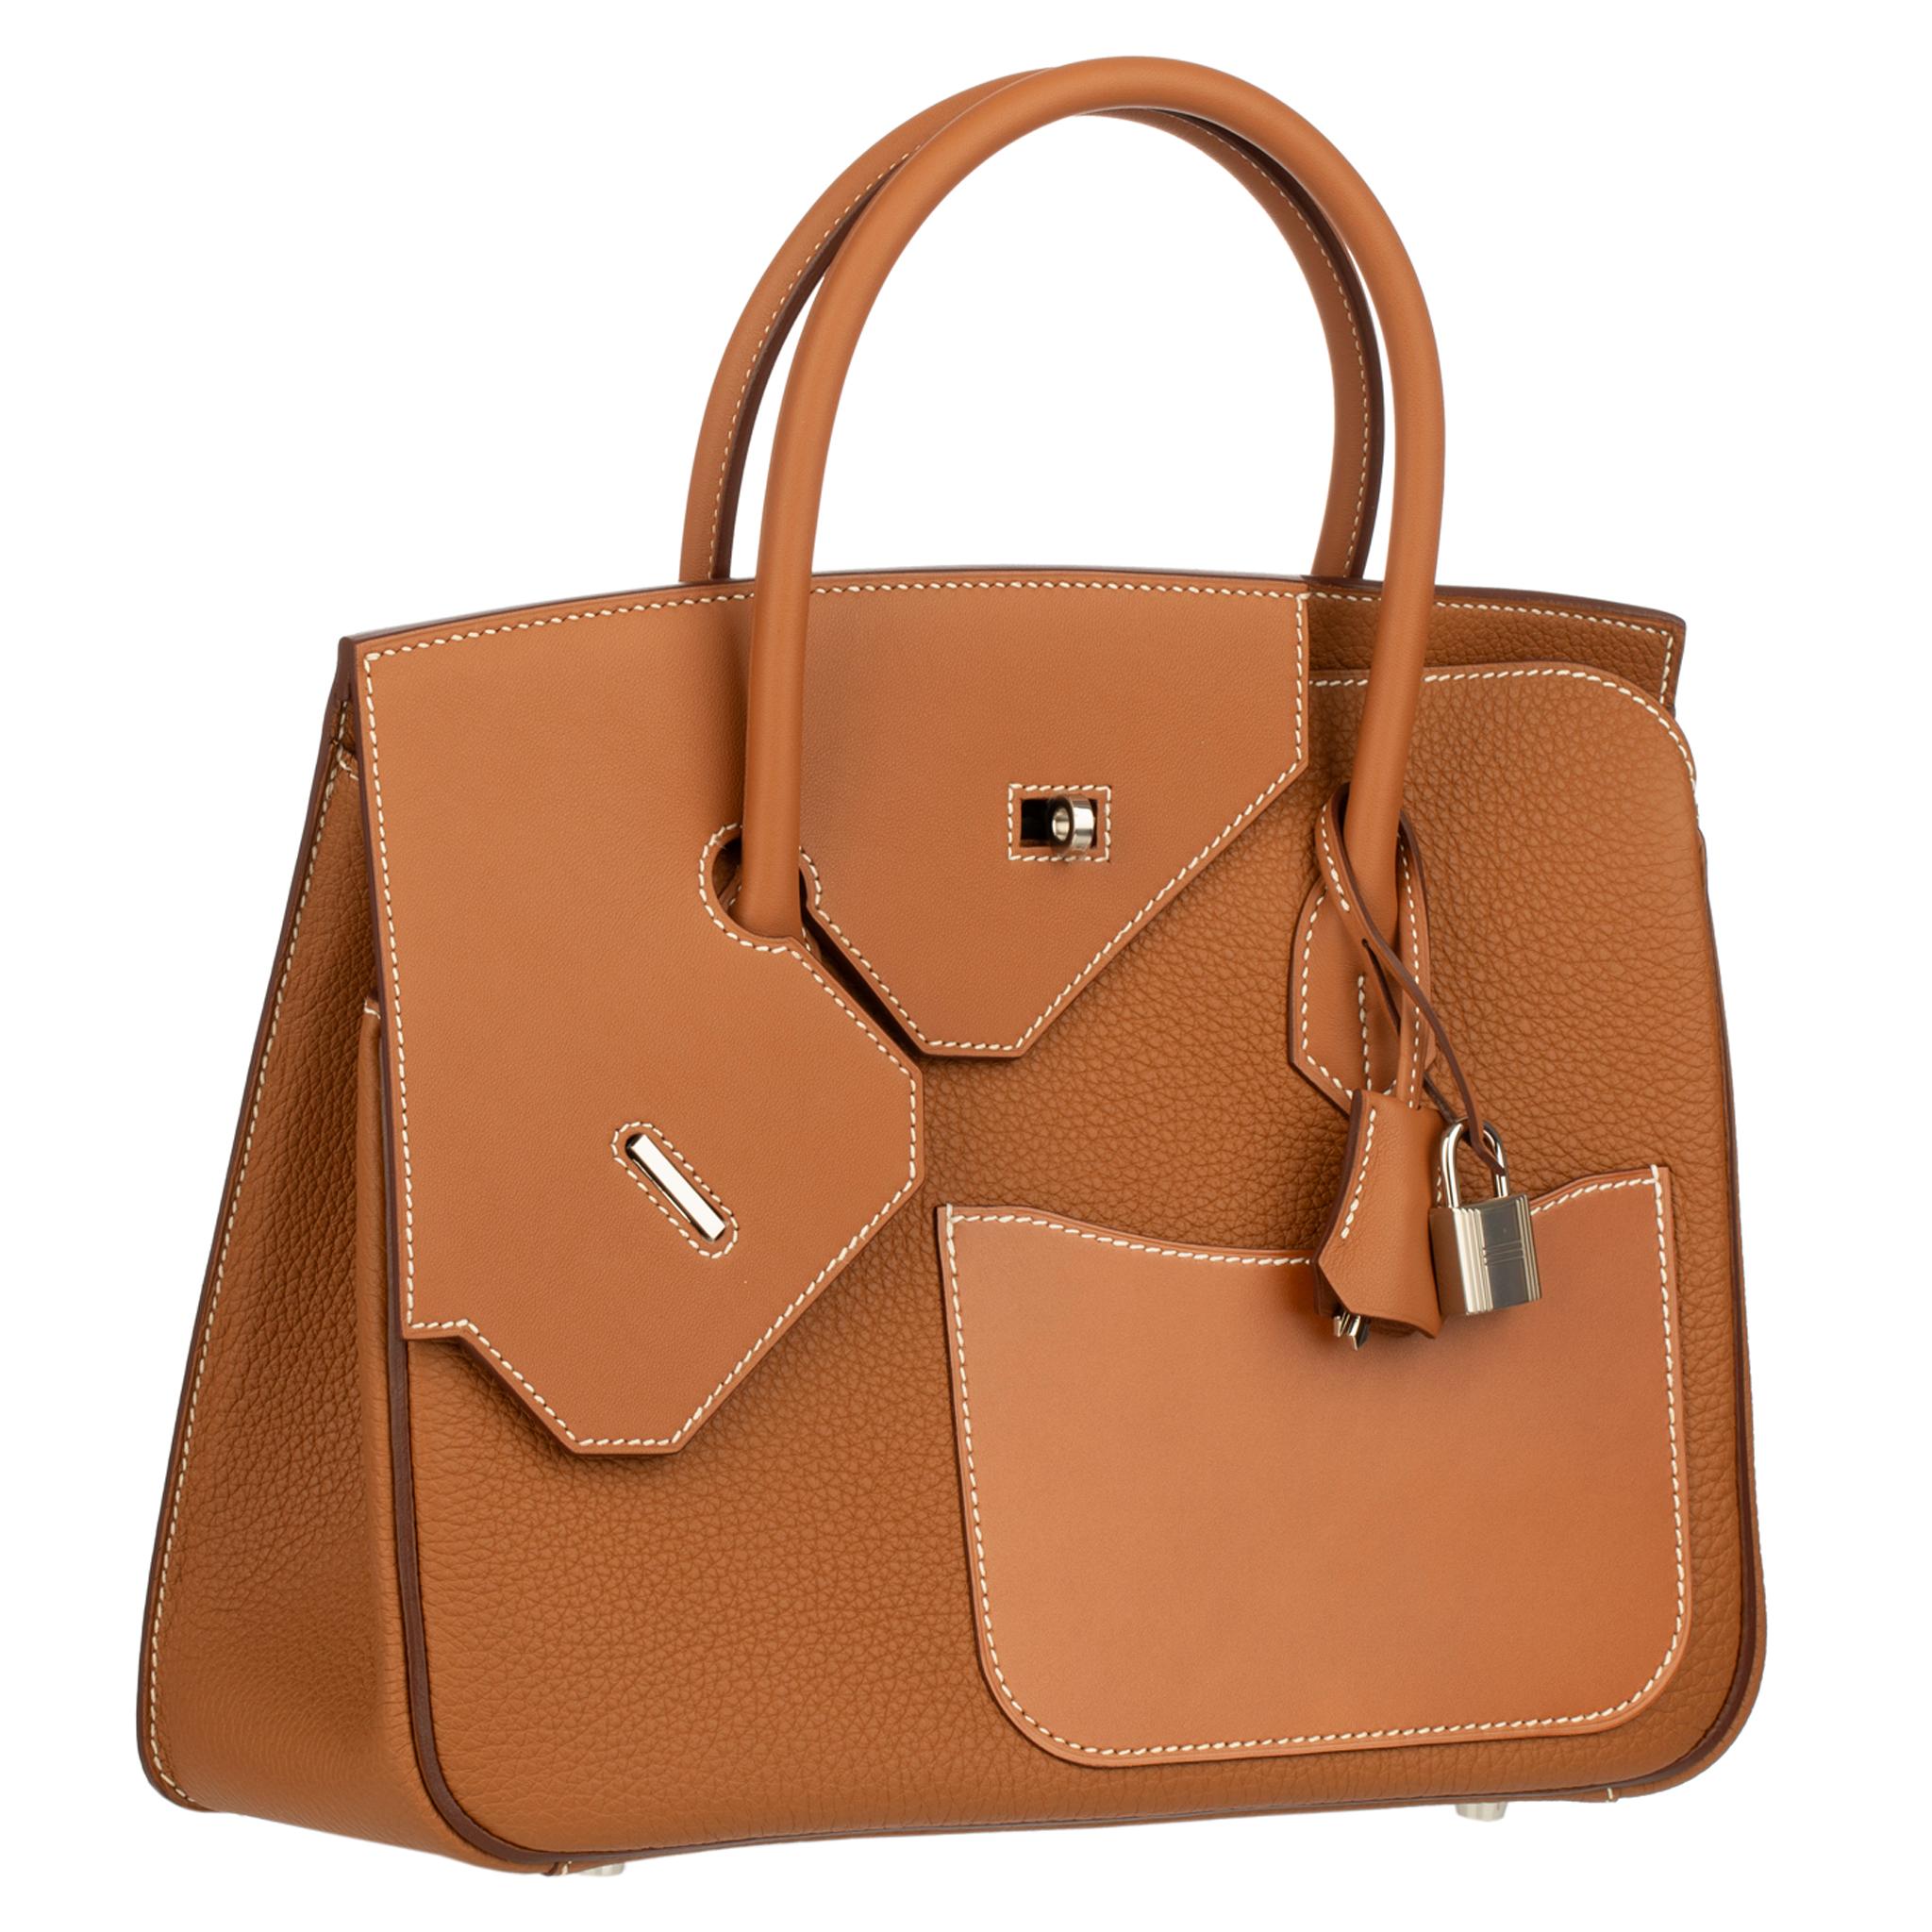 The Hermes Birkin Desordre 30cm in Gold Togo and Swift Leather with Palladium Hardware is a bold fusion of textures and hues, redefining luxury with its unique design.

Crafted meticulously by Hermes artisans, this exceptional bag showcases the